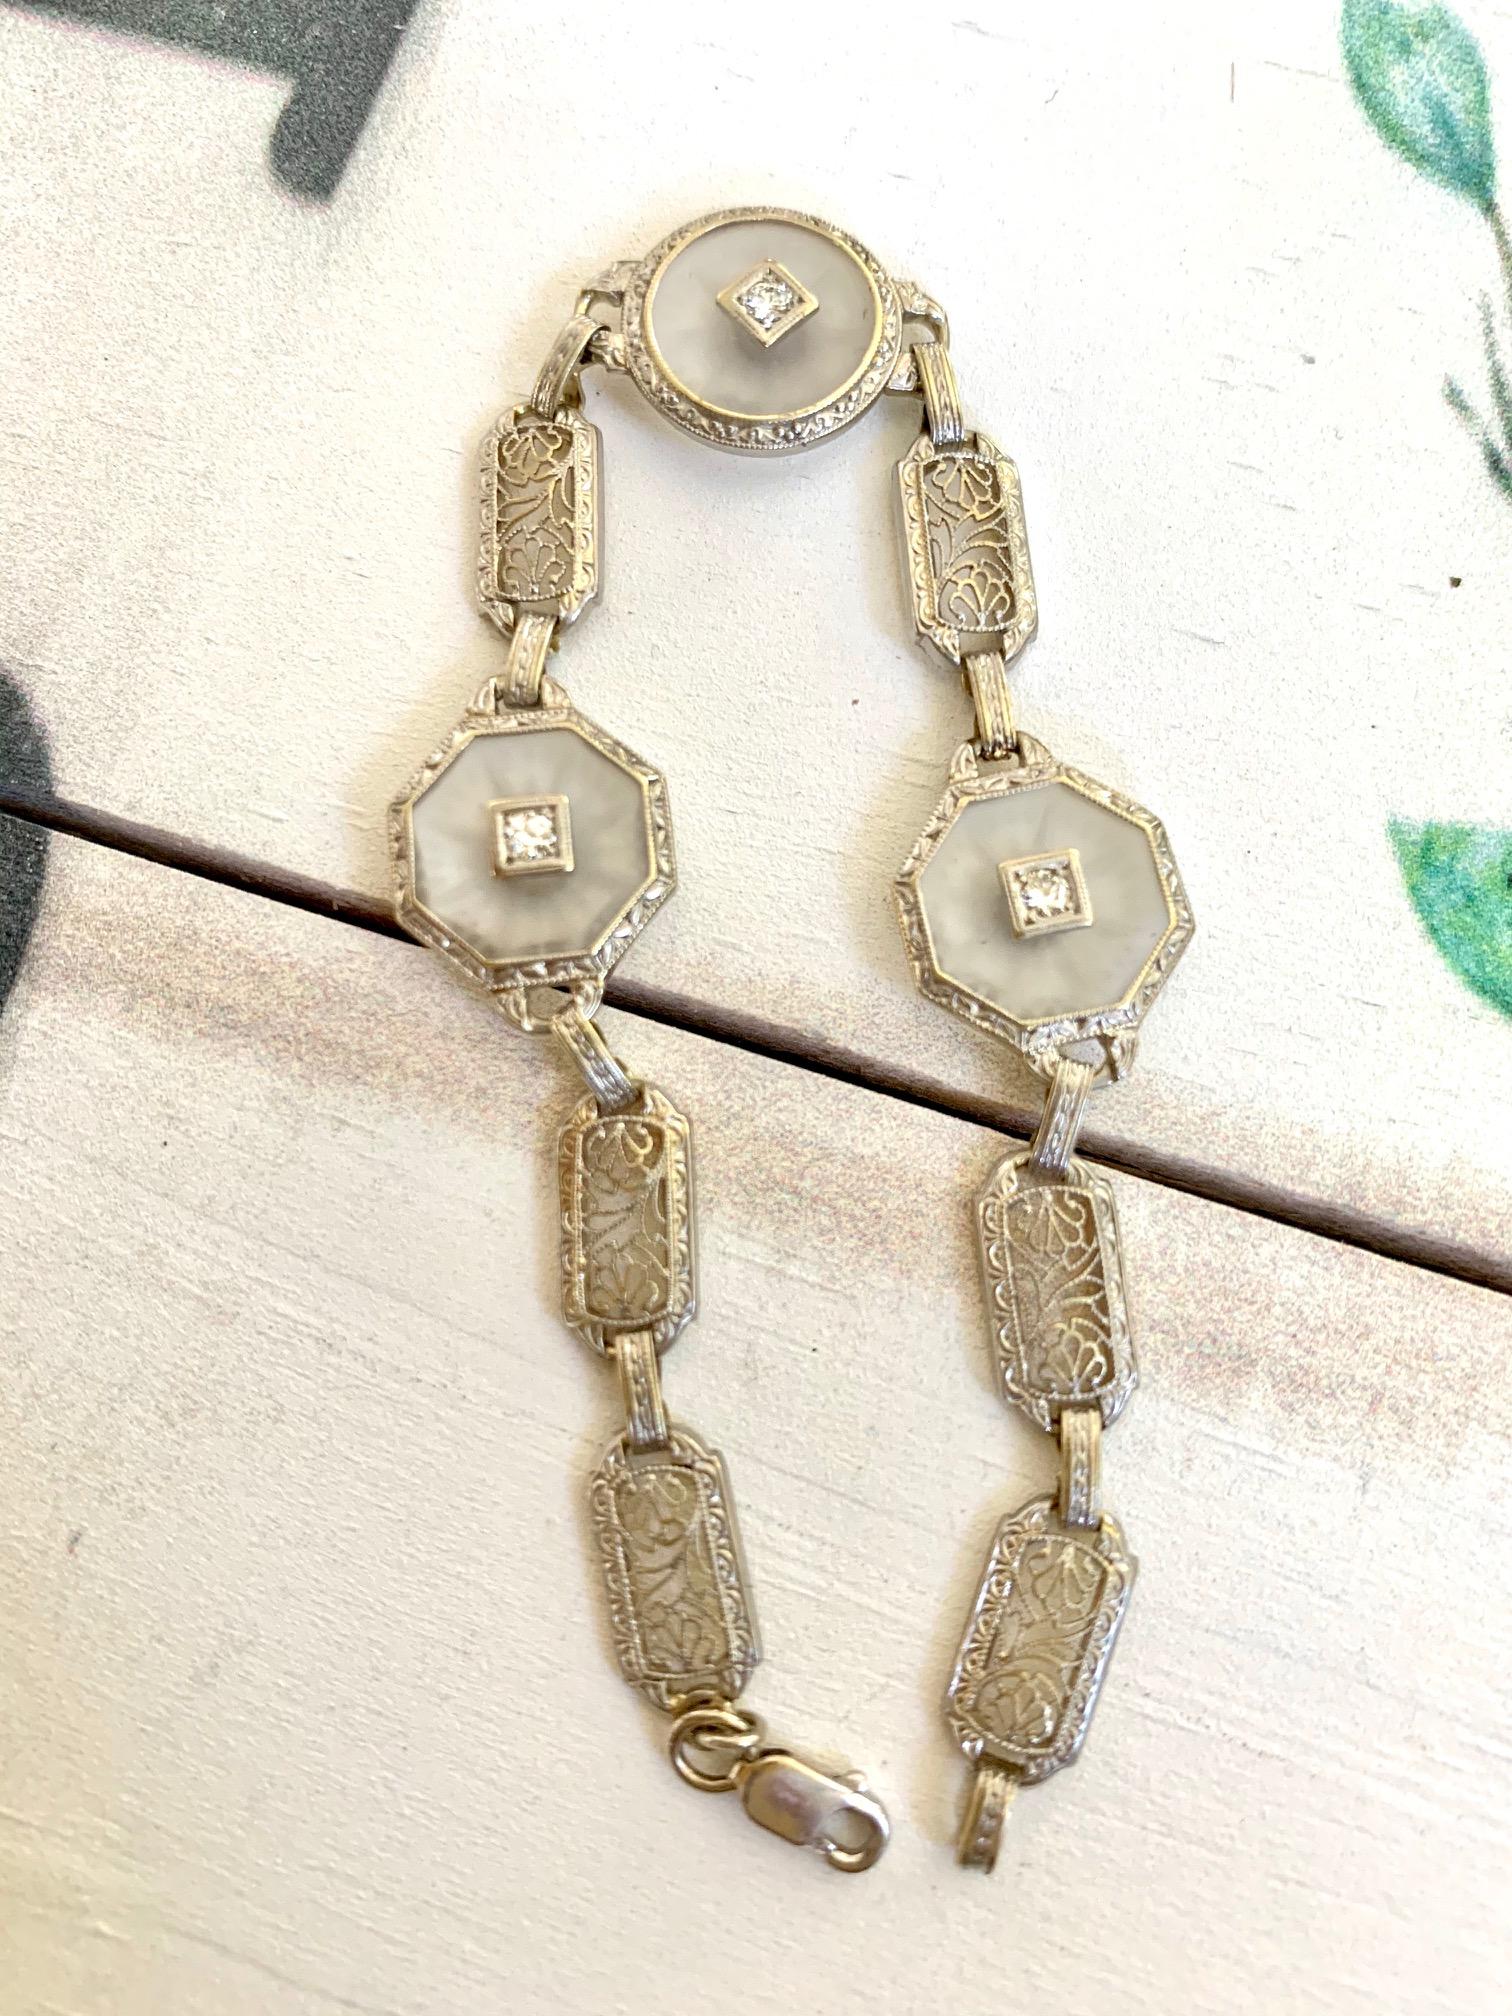 These beautiful Art Deco Camphor Glass  and Diamond Filigree bracelet is set in 14k white and yellow Gold.  Each piece of Camphor Glass  (3) features a Diamond center.  

Length: 7